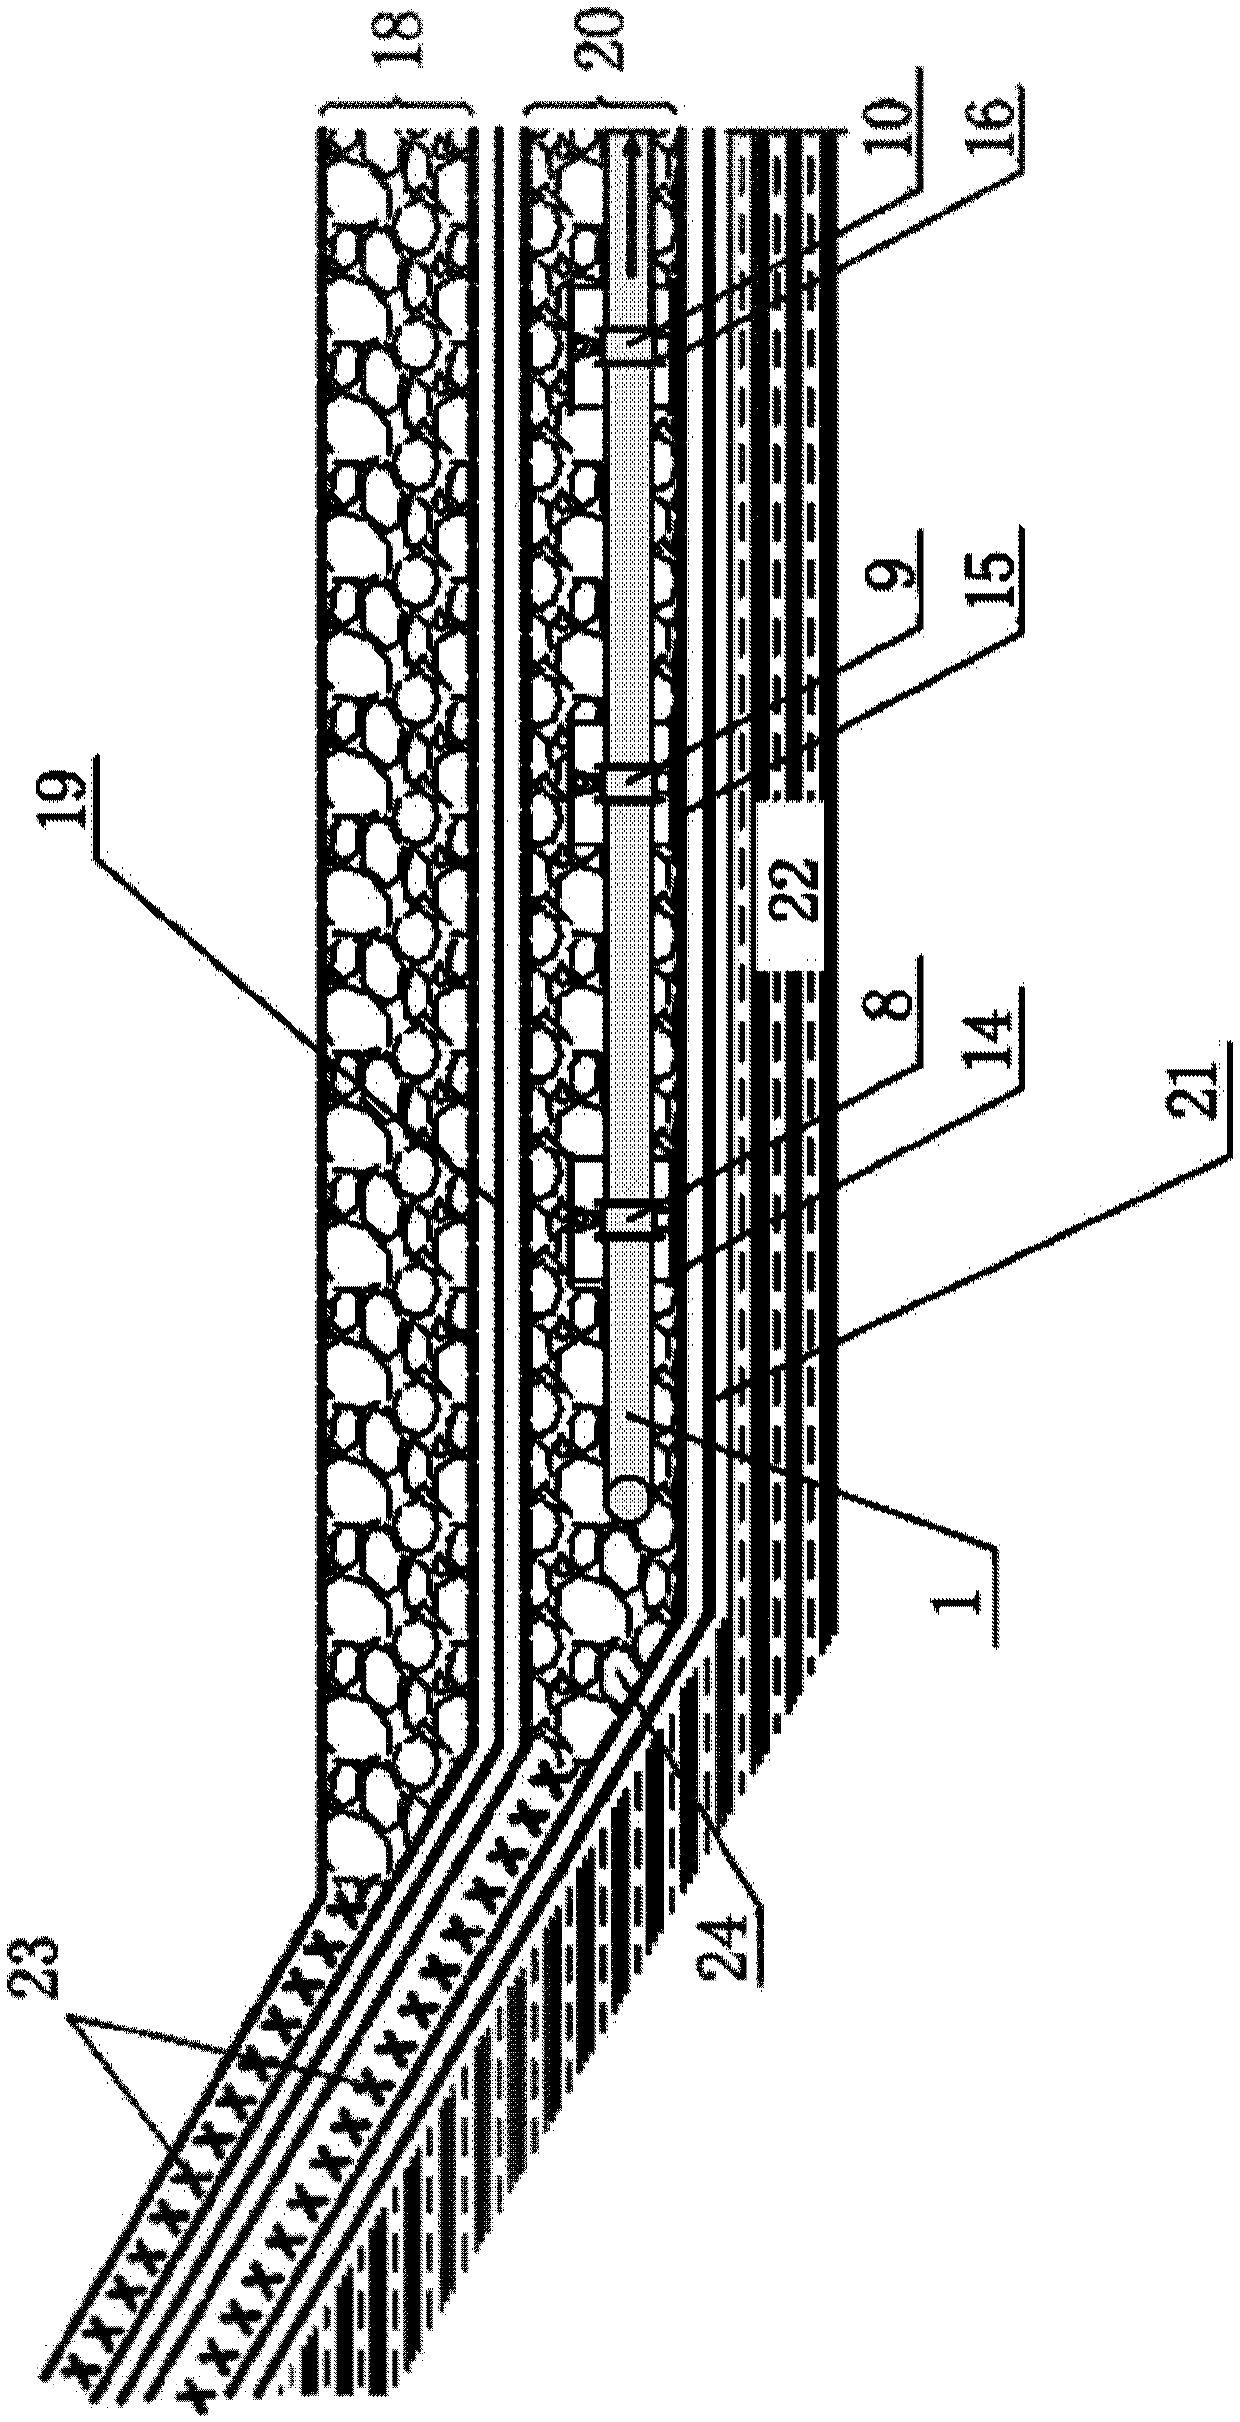 Landfill isolating membrane seepage block detection method and device